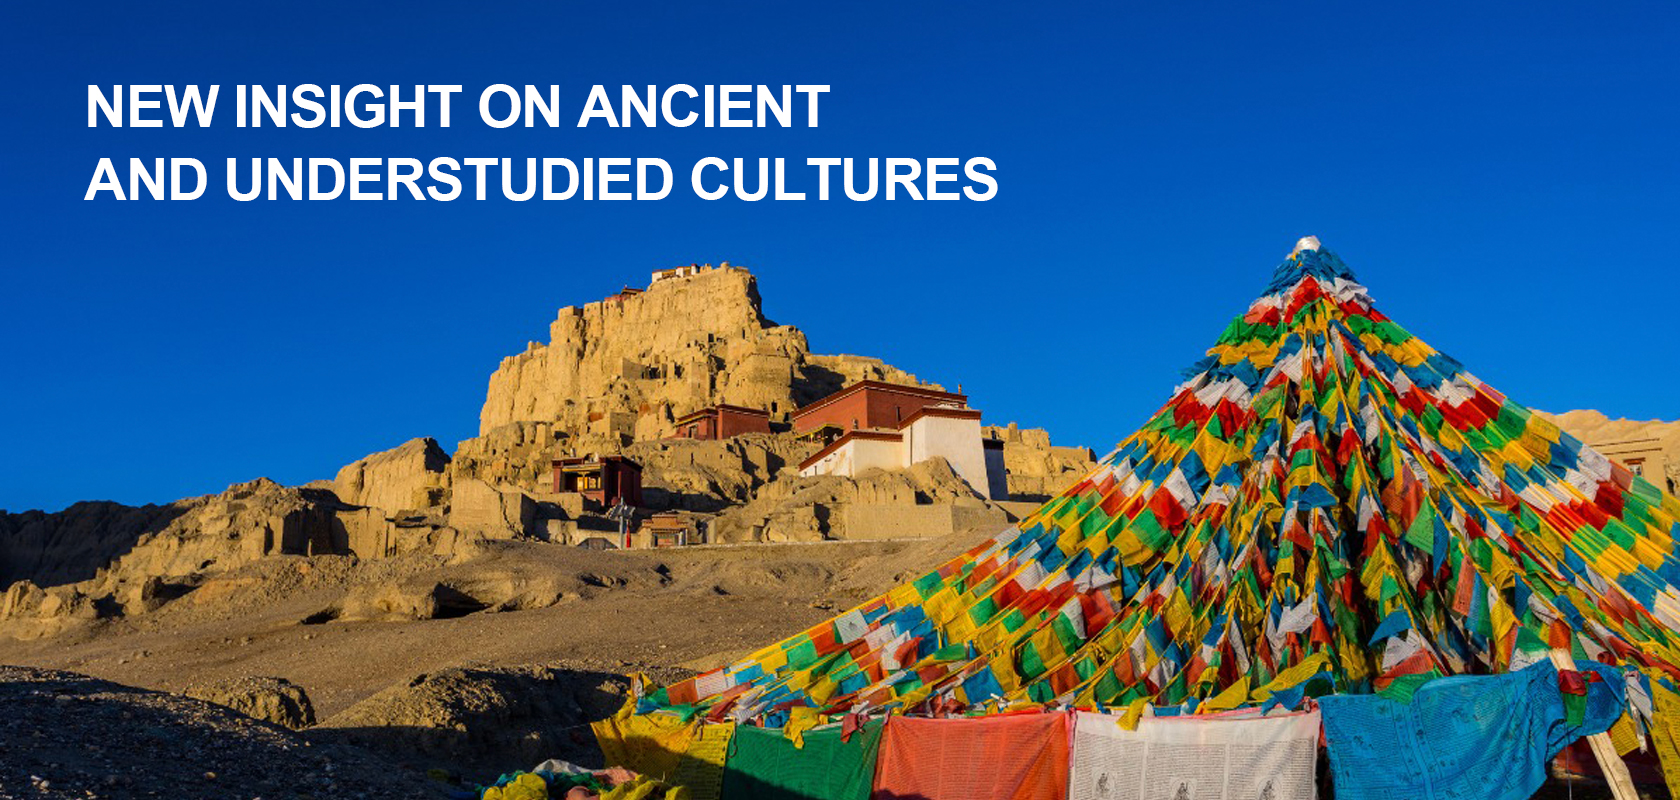 NEW INSIGHT ON ANCIENT AND UNDERSTUDIED CULTURES